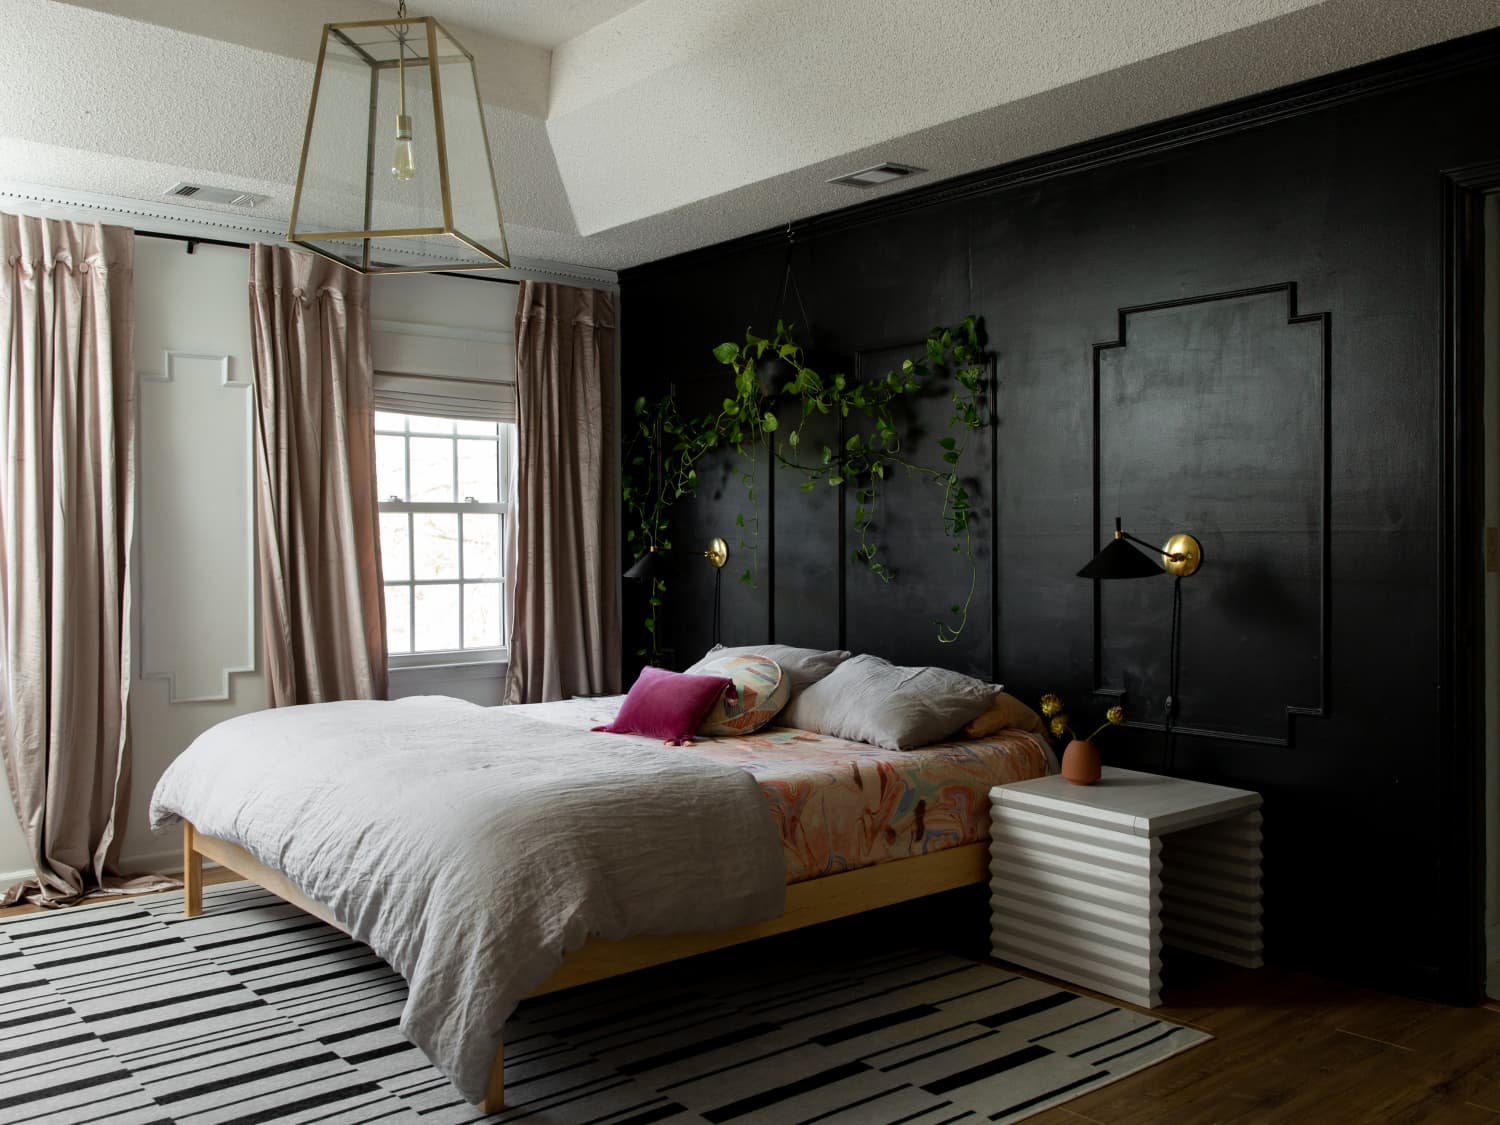 What Colors Go With Black? Try These 13 Combinations | Apartment Therapy